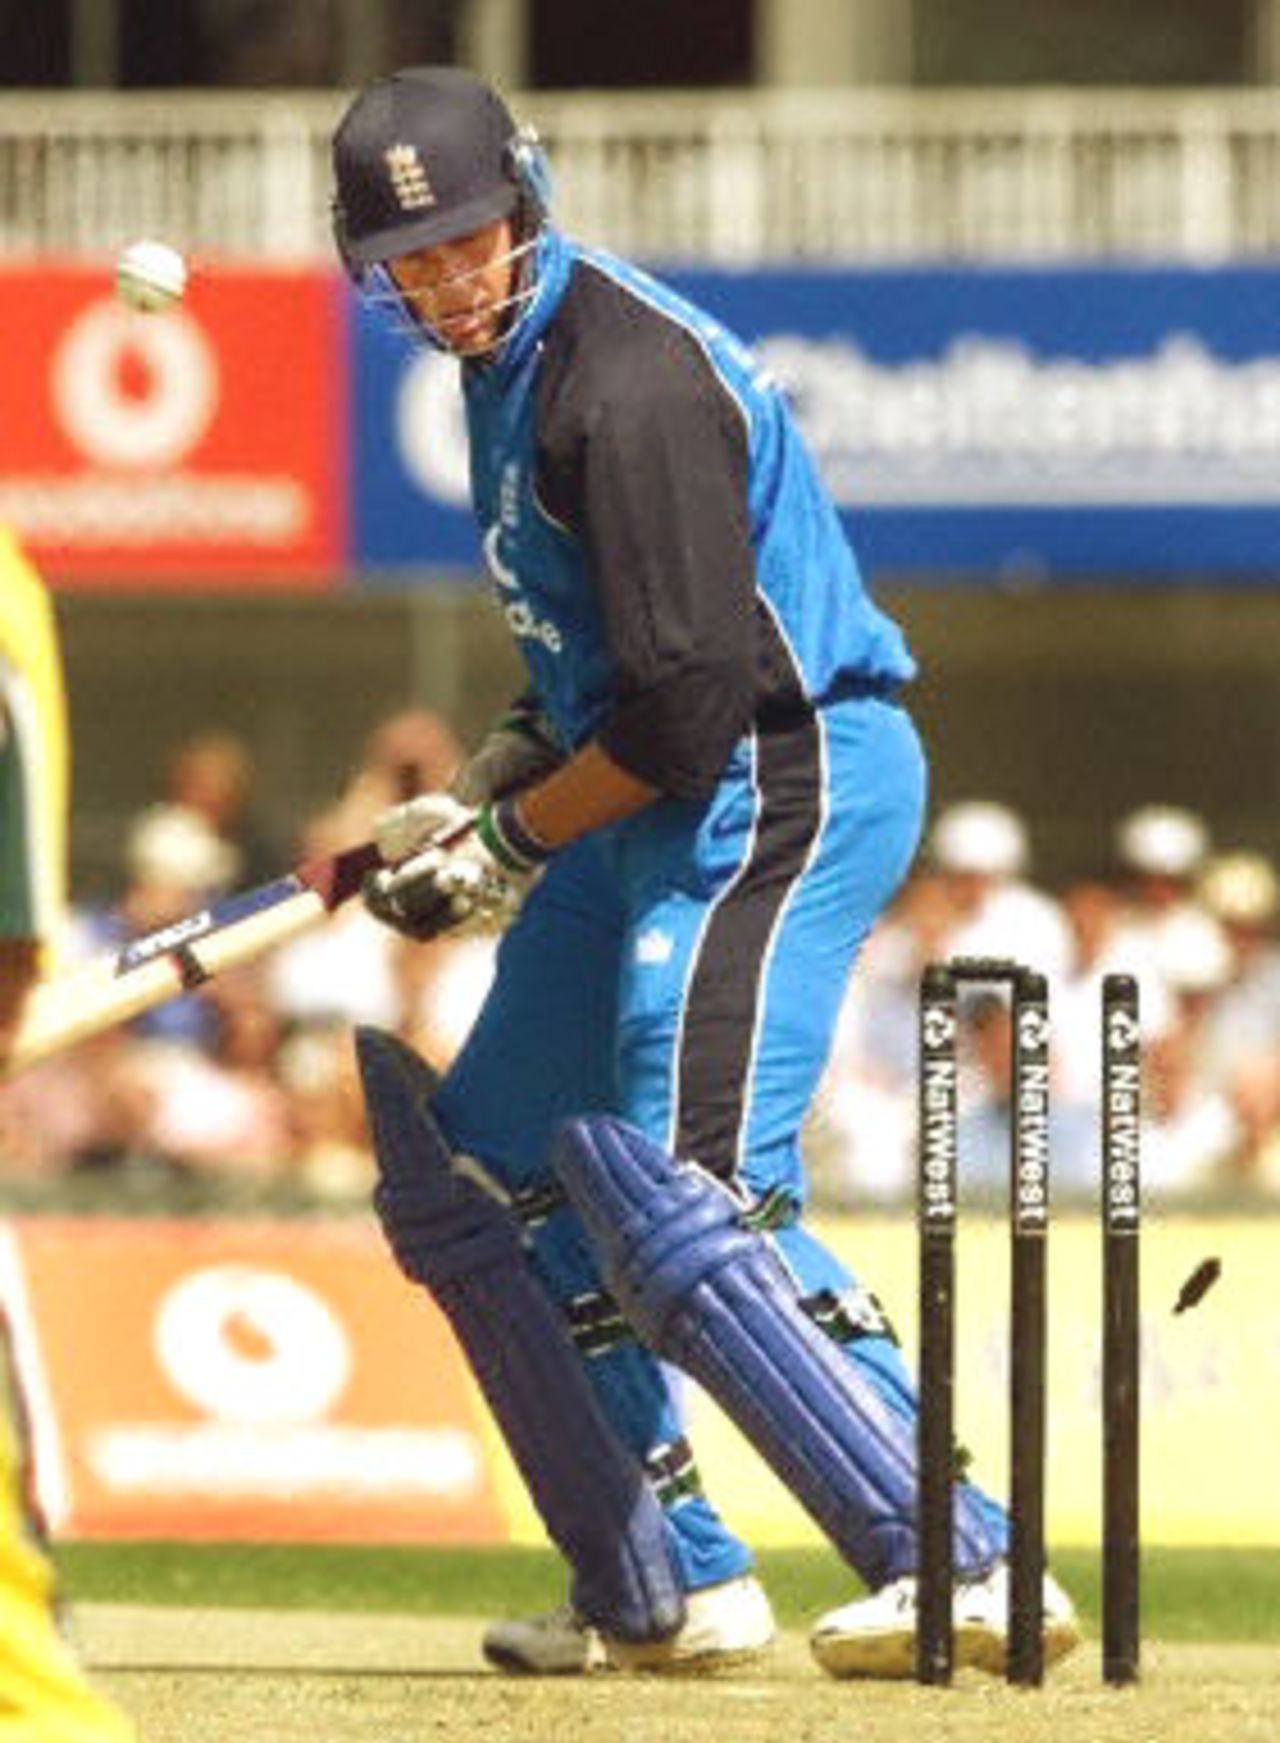 Marcus Trescothick looks at the bail fly after being bowled by Glenn McGrath for a duck, 9th ODI at the Oval, 21 June 2001.